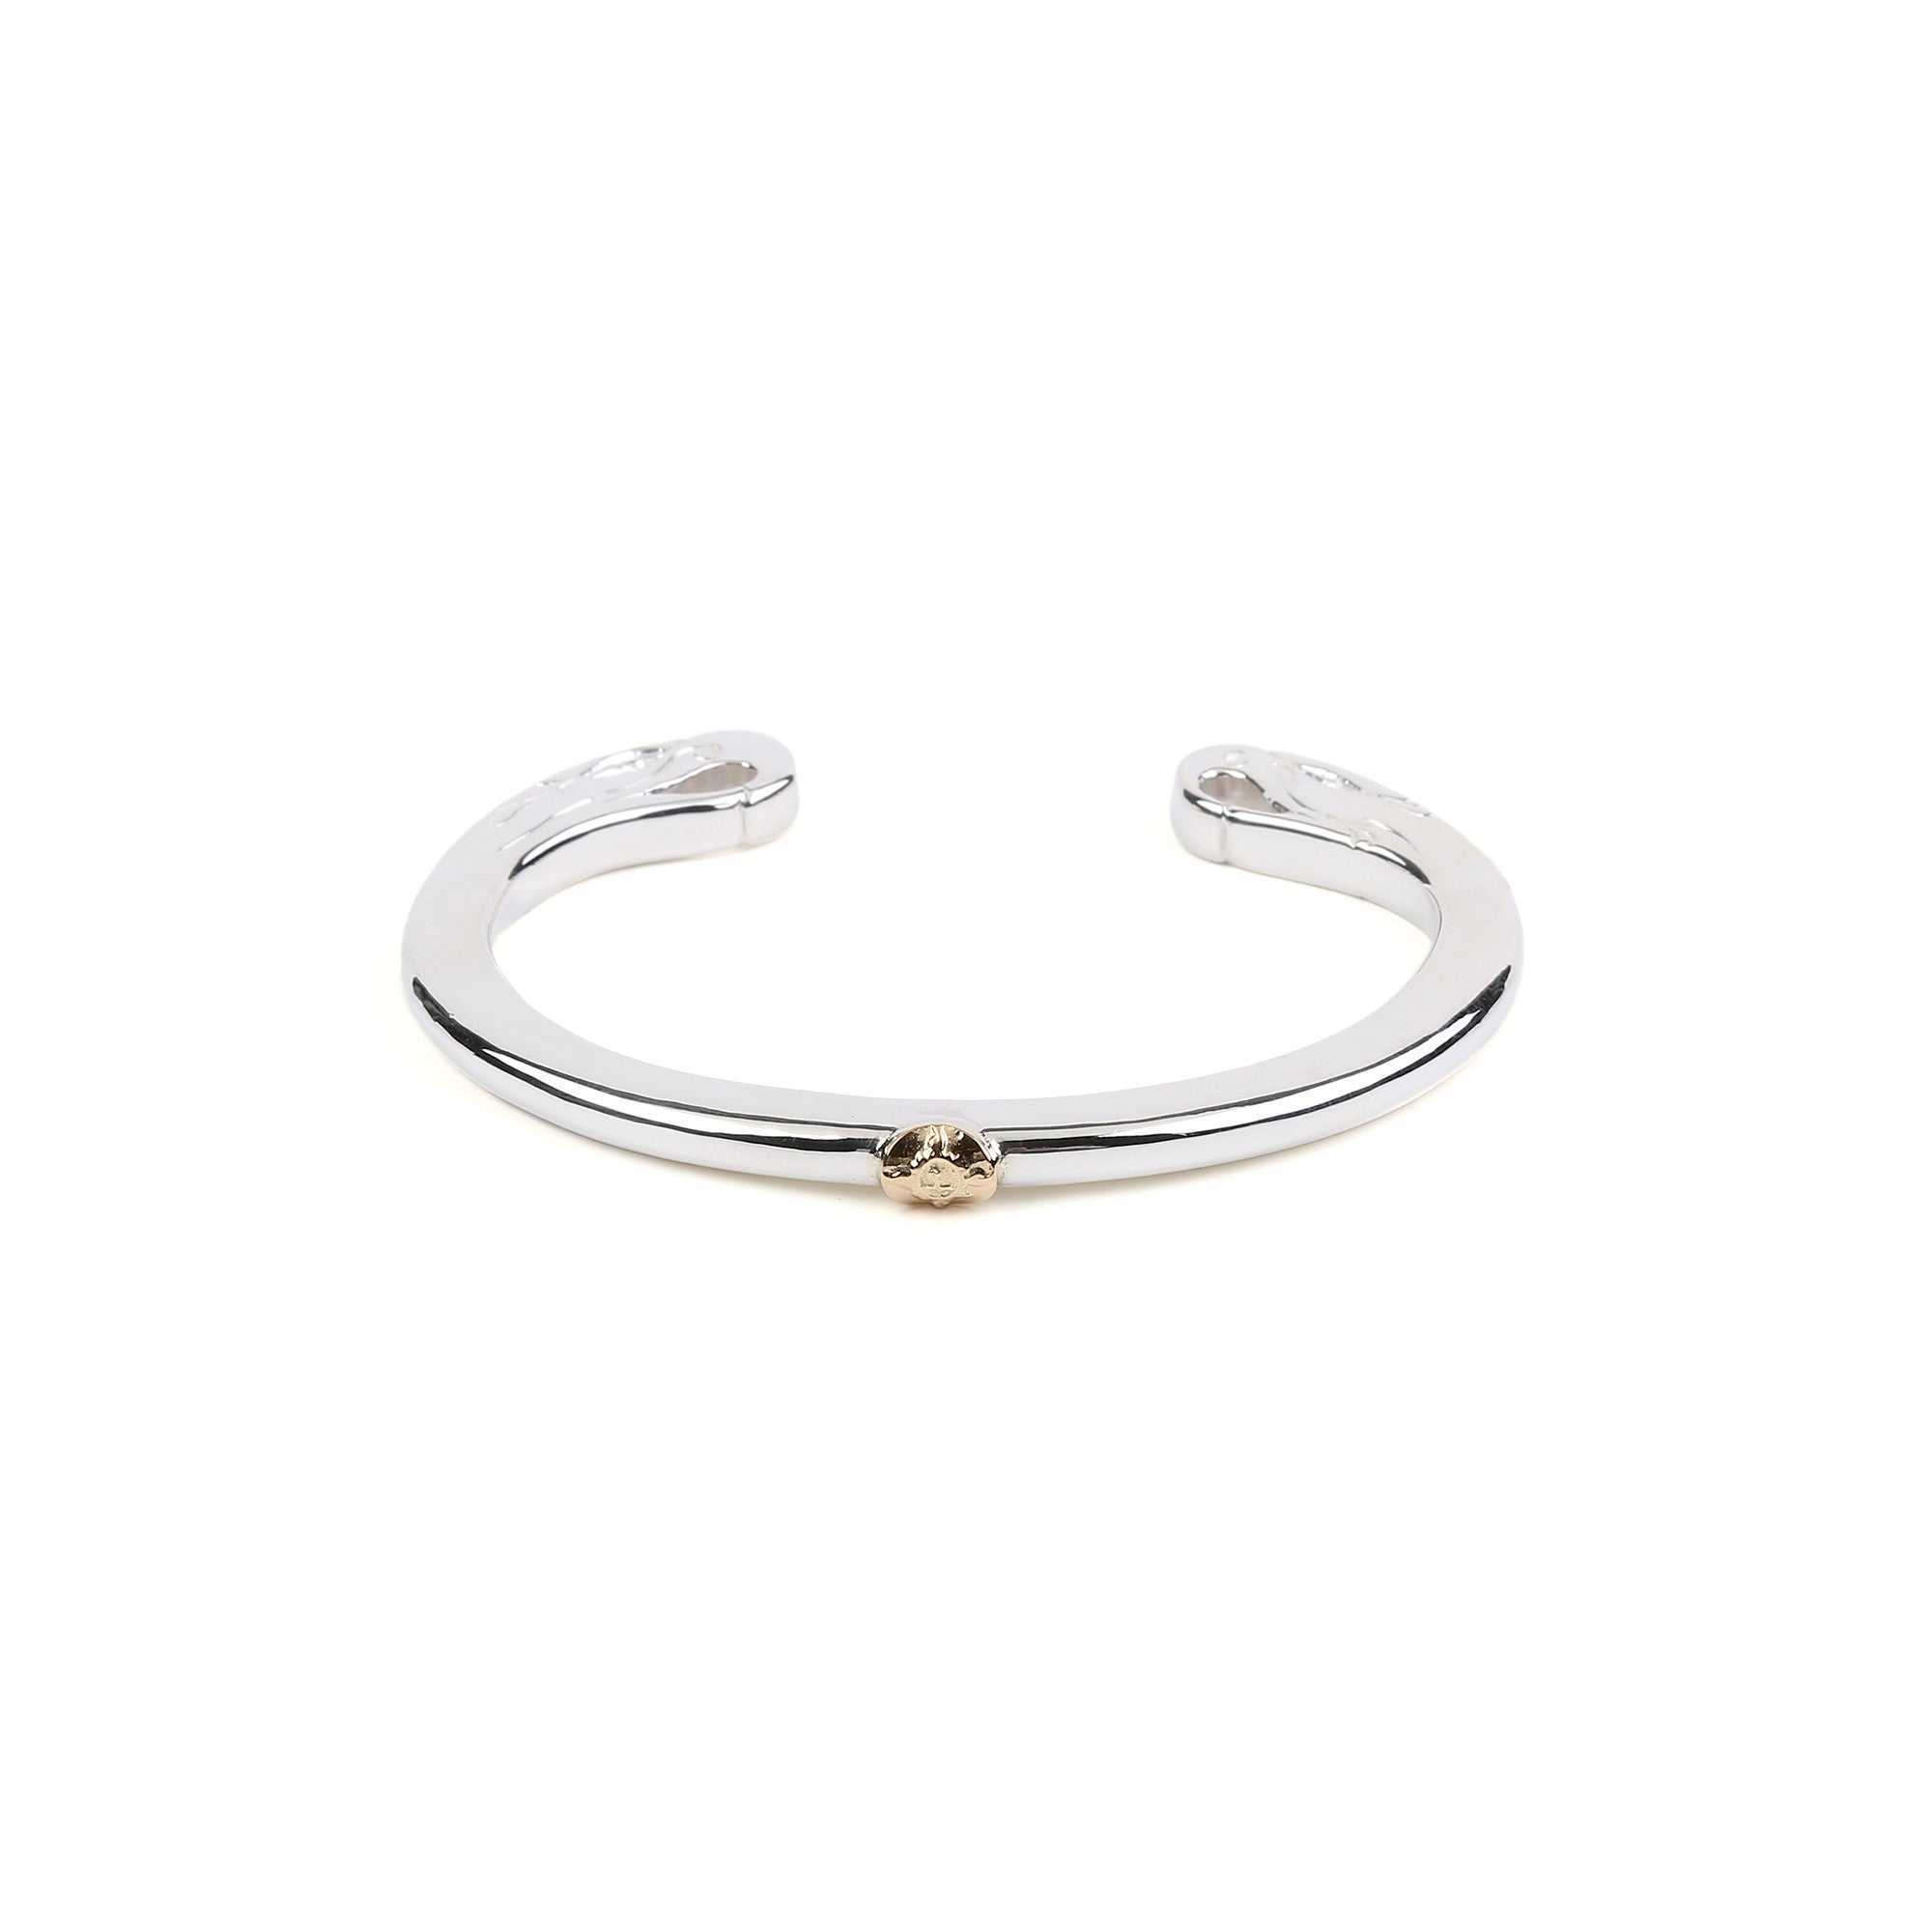 First Arrow's "Double Eagle's Head" Bangle With 18K Gold Emblem (BR-195)